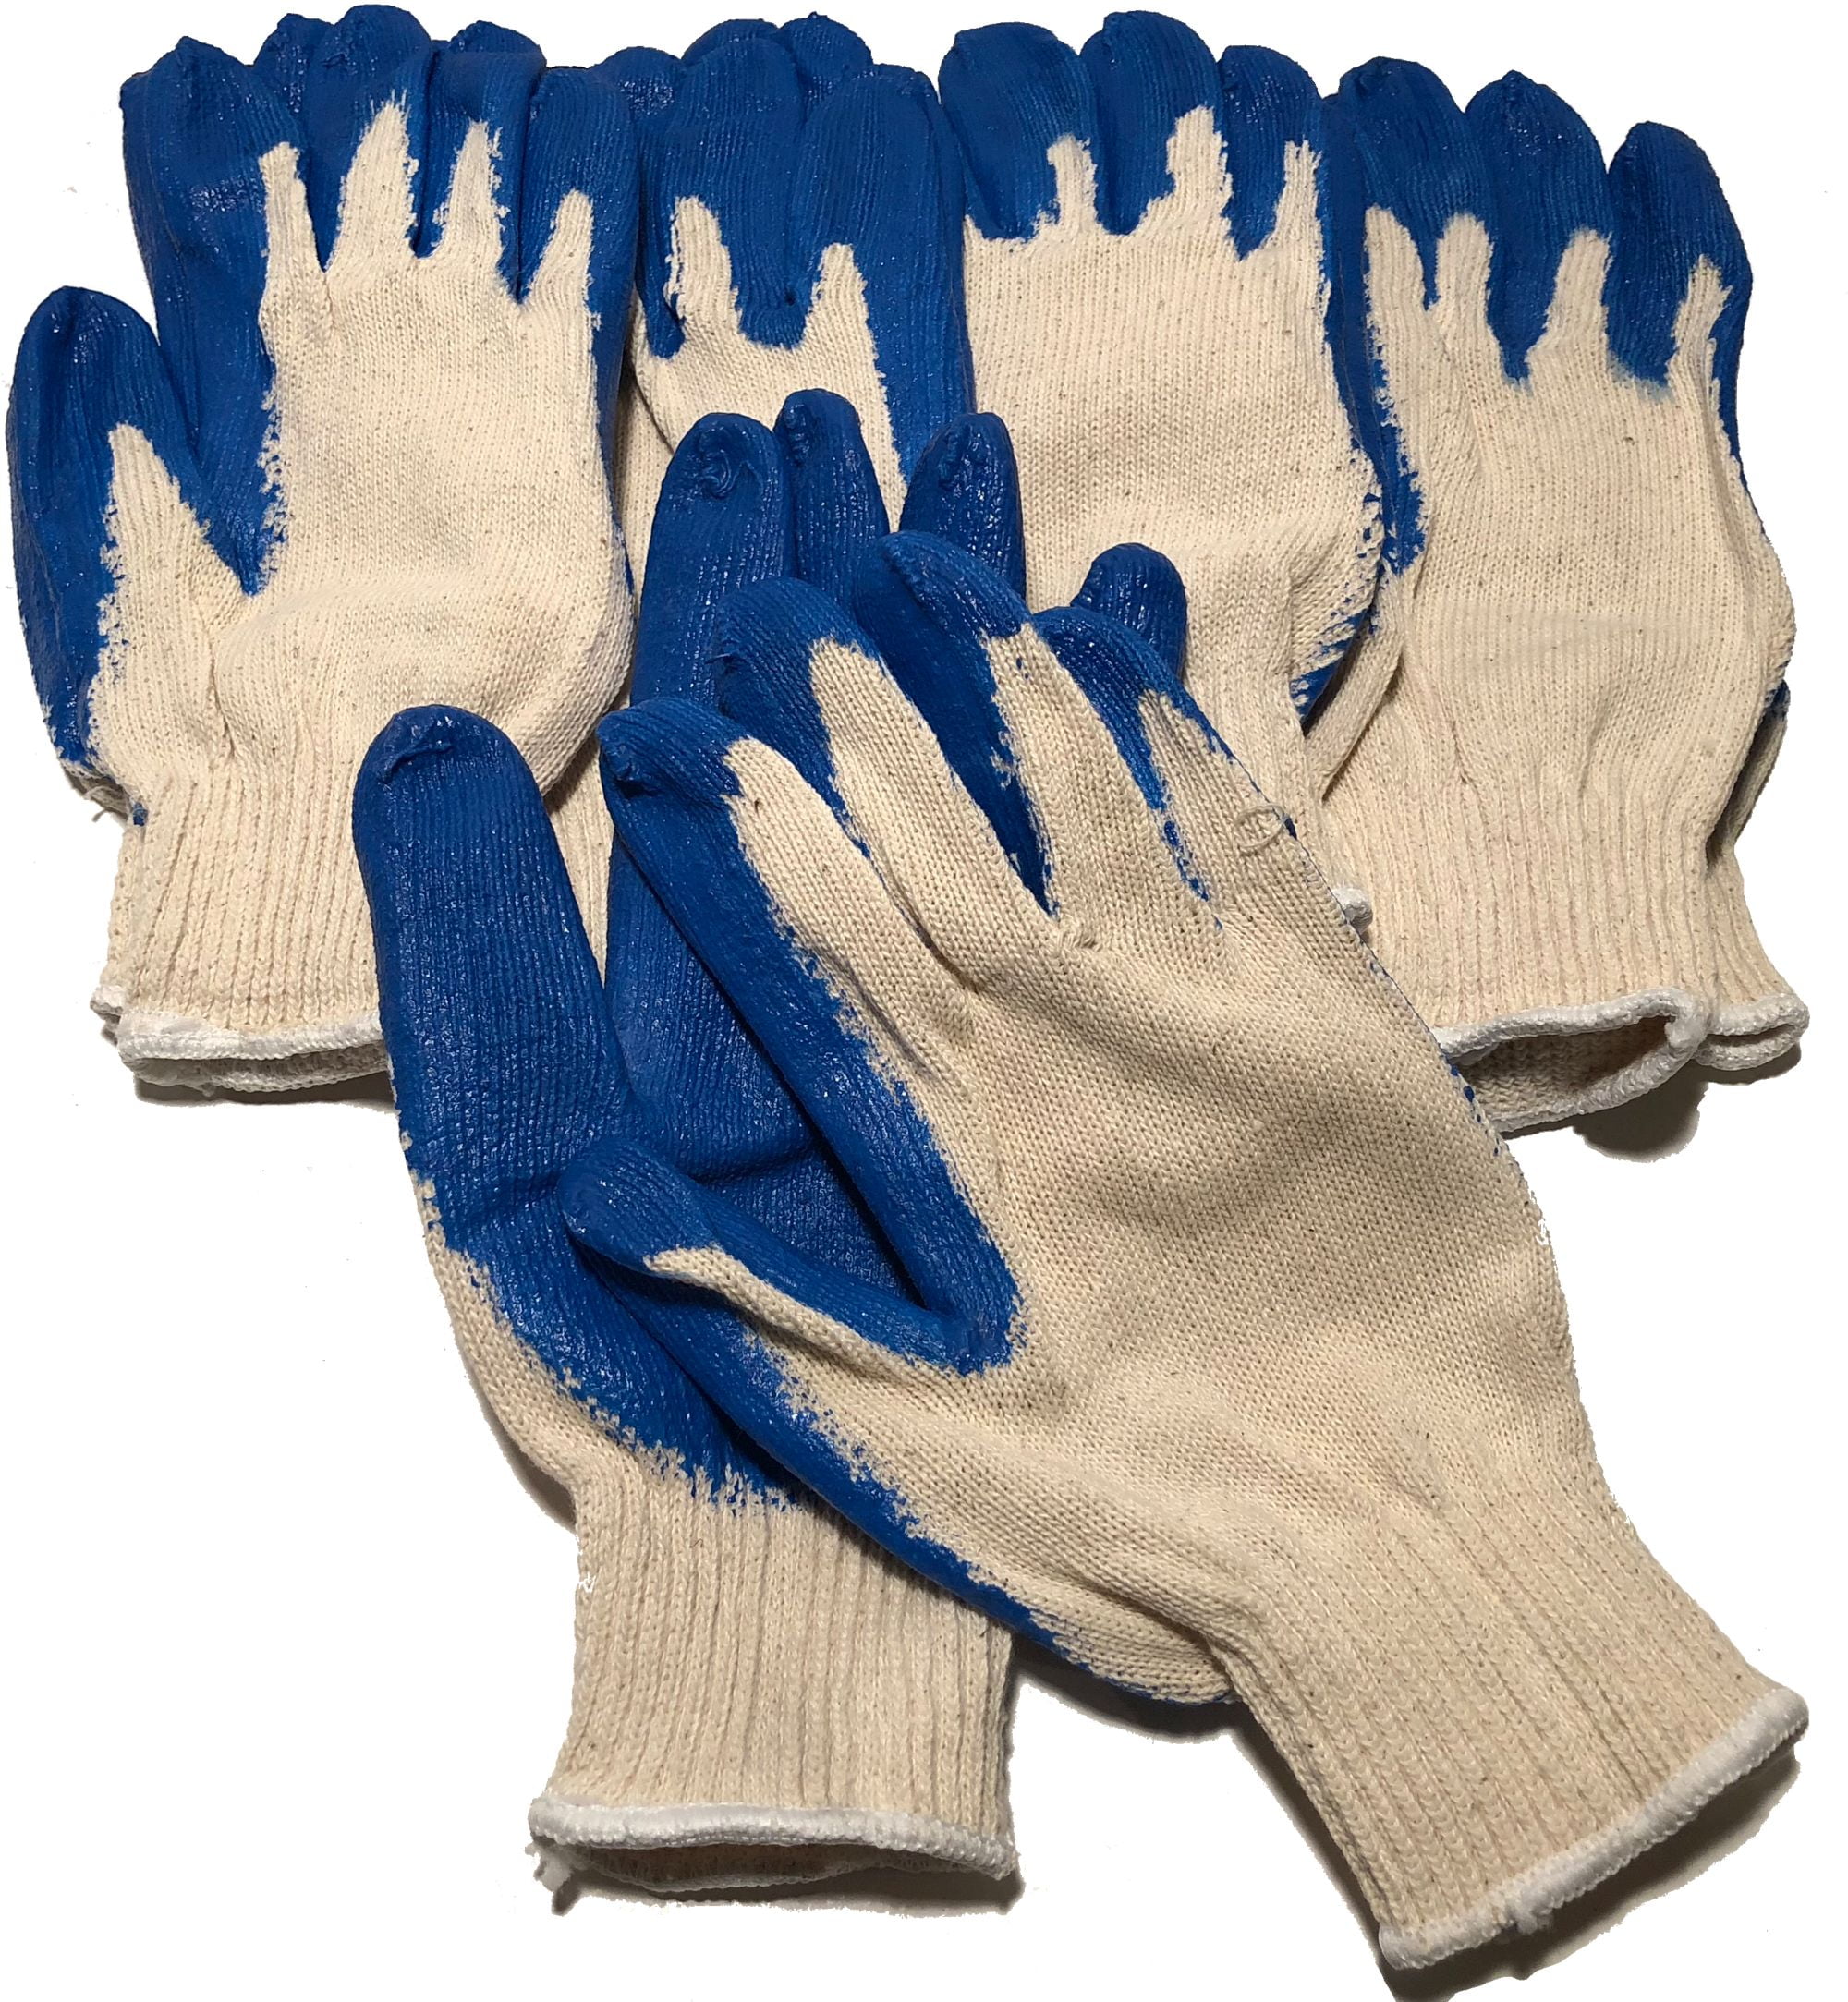 Liberty Gloves Made With Kevlar® Knit with PVC Dots-Size Large Dozen 